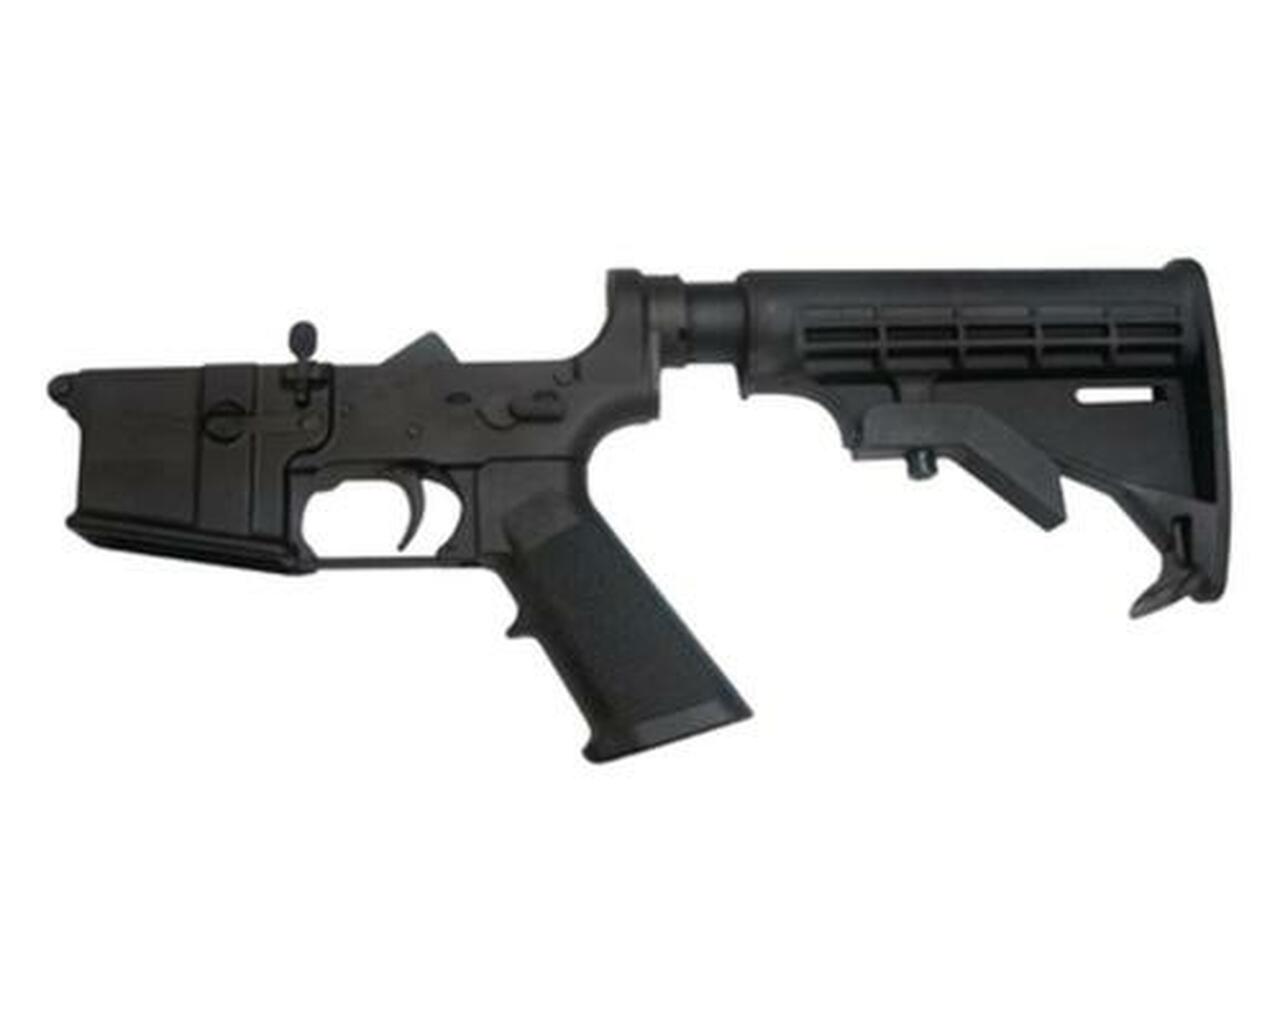 Image of CMMG AR-15 LOWER COMPLETE, 6-POS MIL-SPEC STOCK